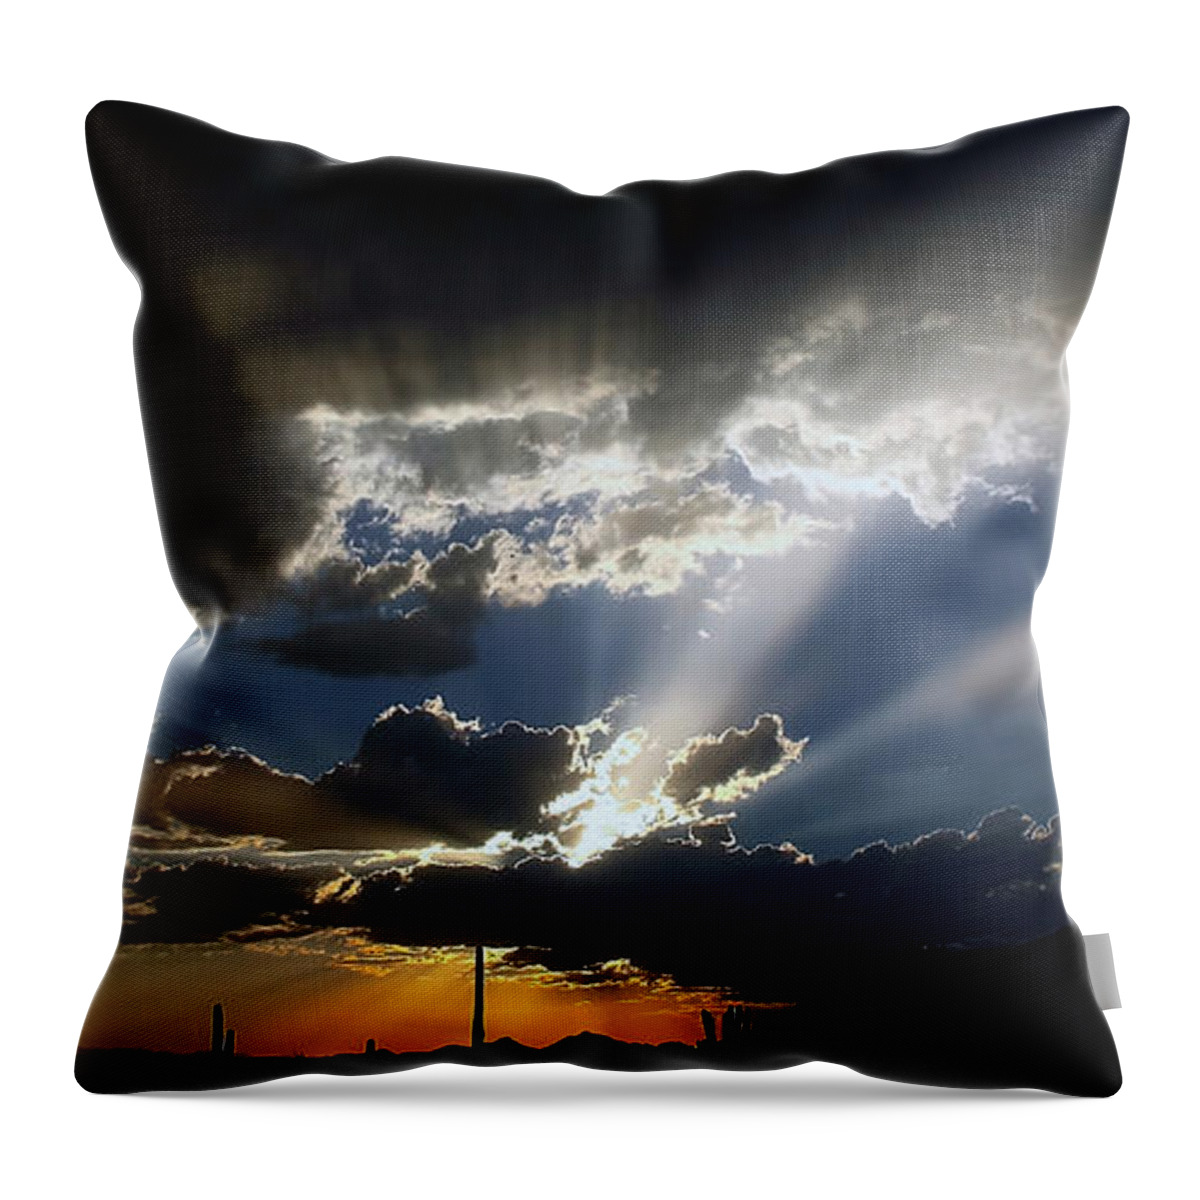 Clouds Throw Pillow featuring the photograph Dramatic Monsoon Sunset by Elaine Malott